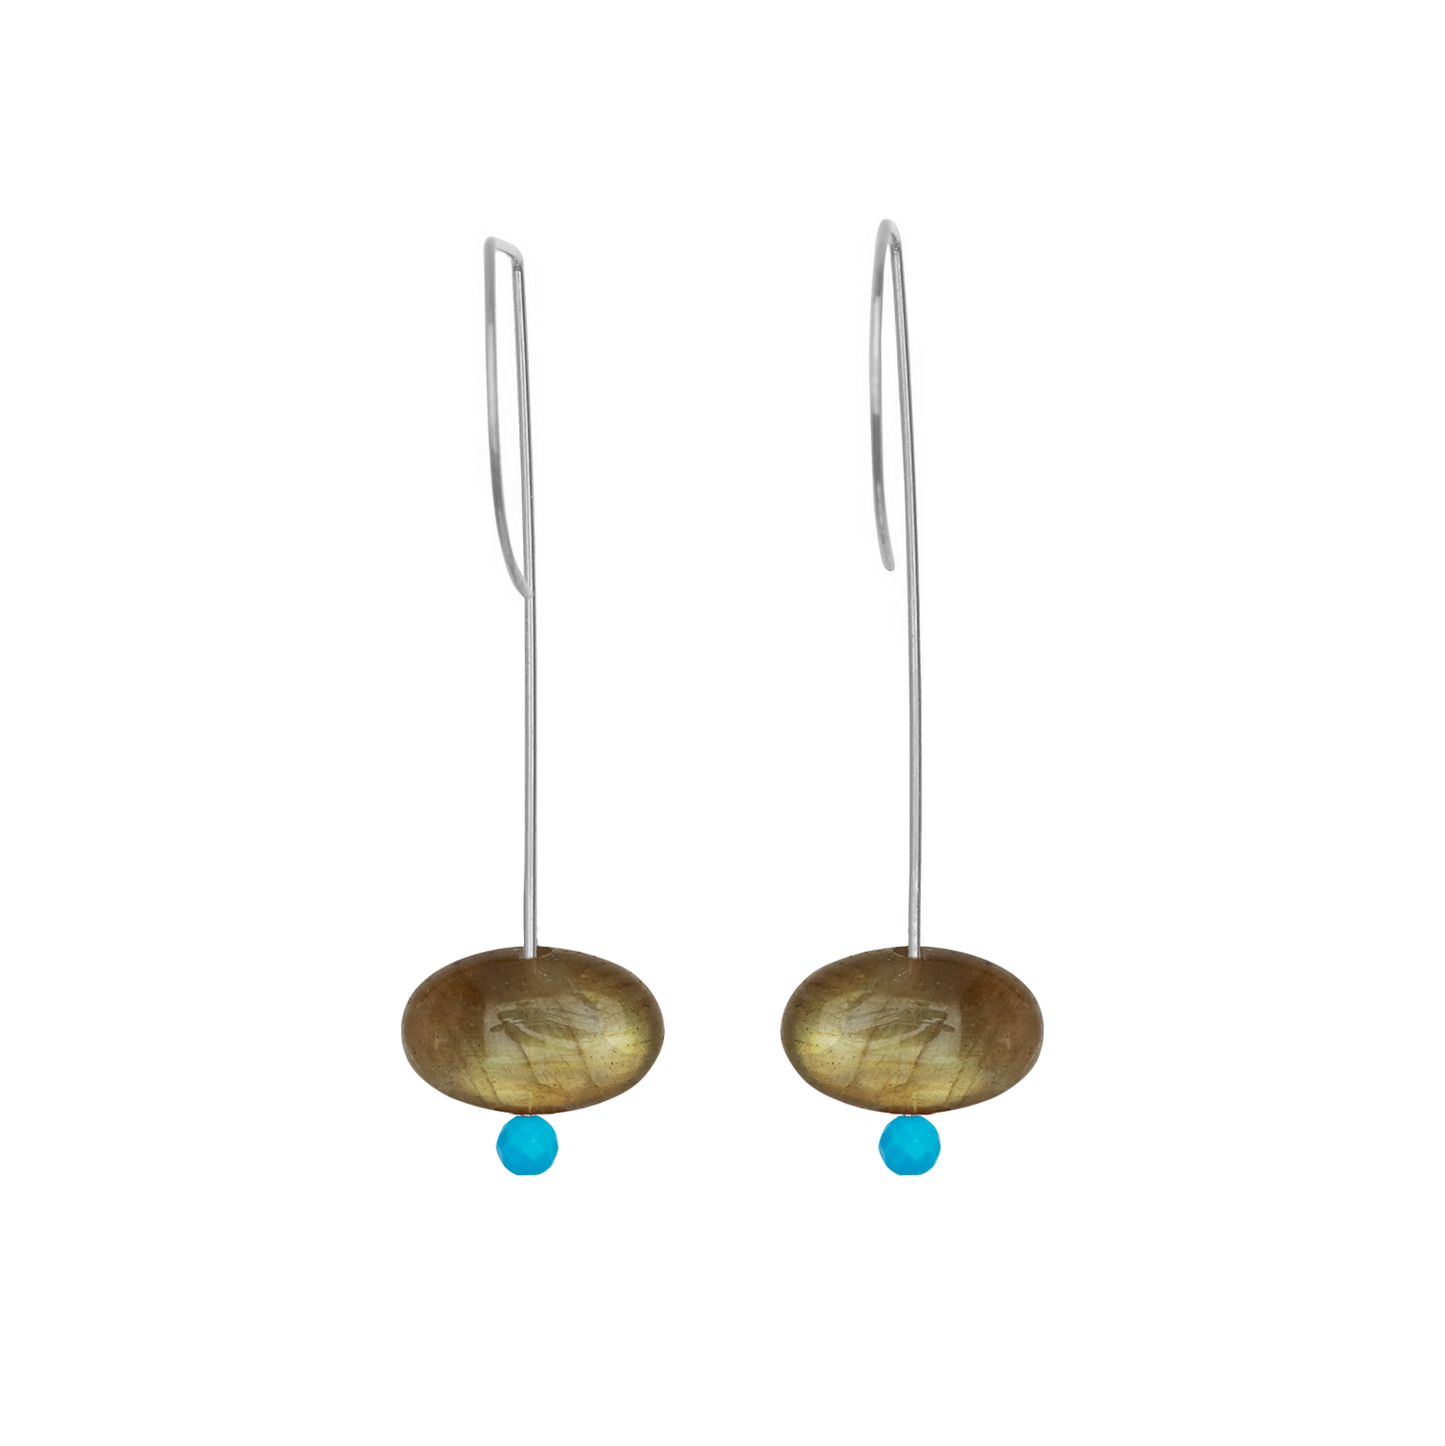 Straight Drop Earrings with Labradorite and Round Beads